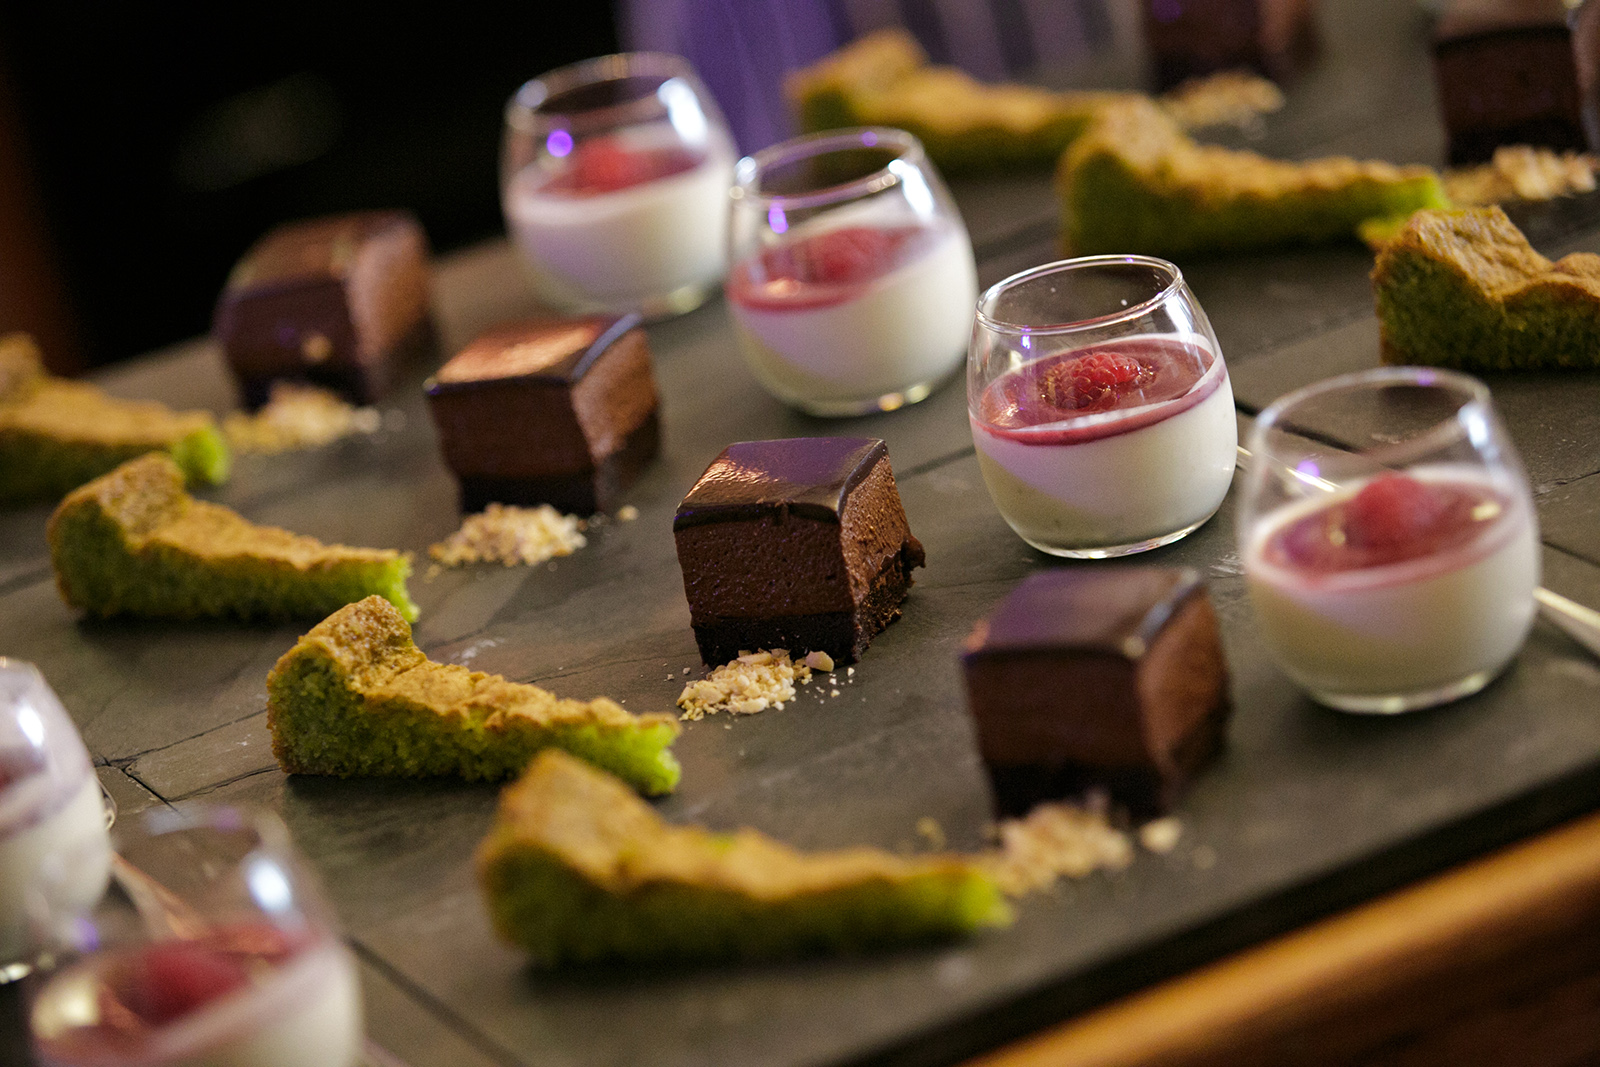 Fine dining Desserts at the somerset retreat